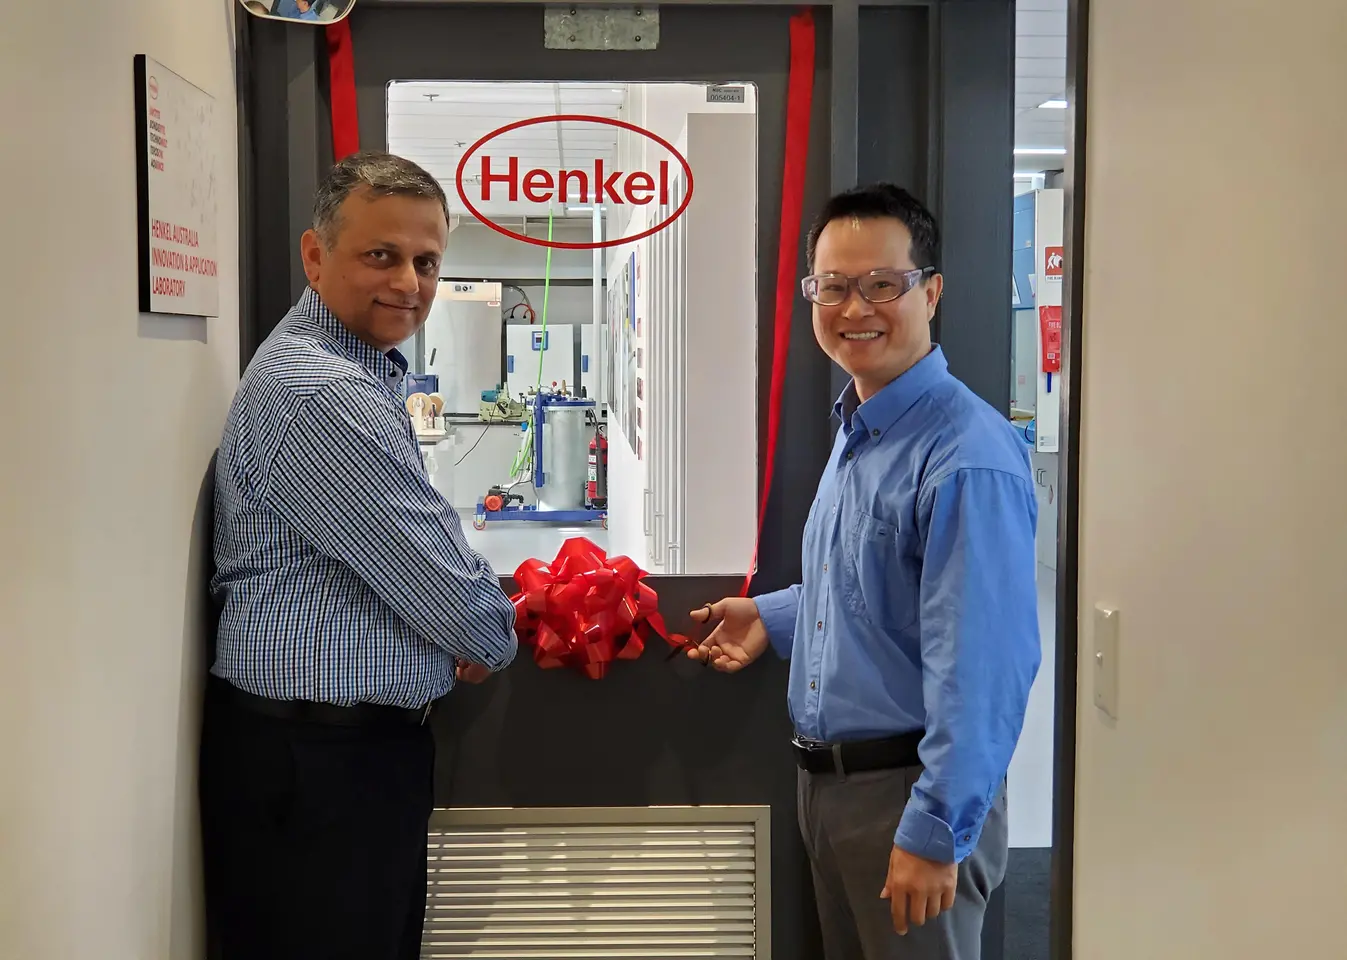 Aamir Qureshi (left), Operations & Supply Chain Manager, and Stephen Liu (right), Senior Chemist, cutting the ribbon to mark the official opening of the upgraded Innovation and Application Lab of Adhesive Technologies in Sydney.